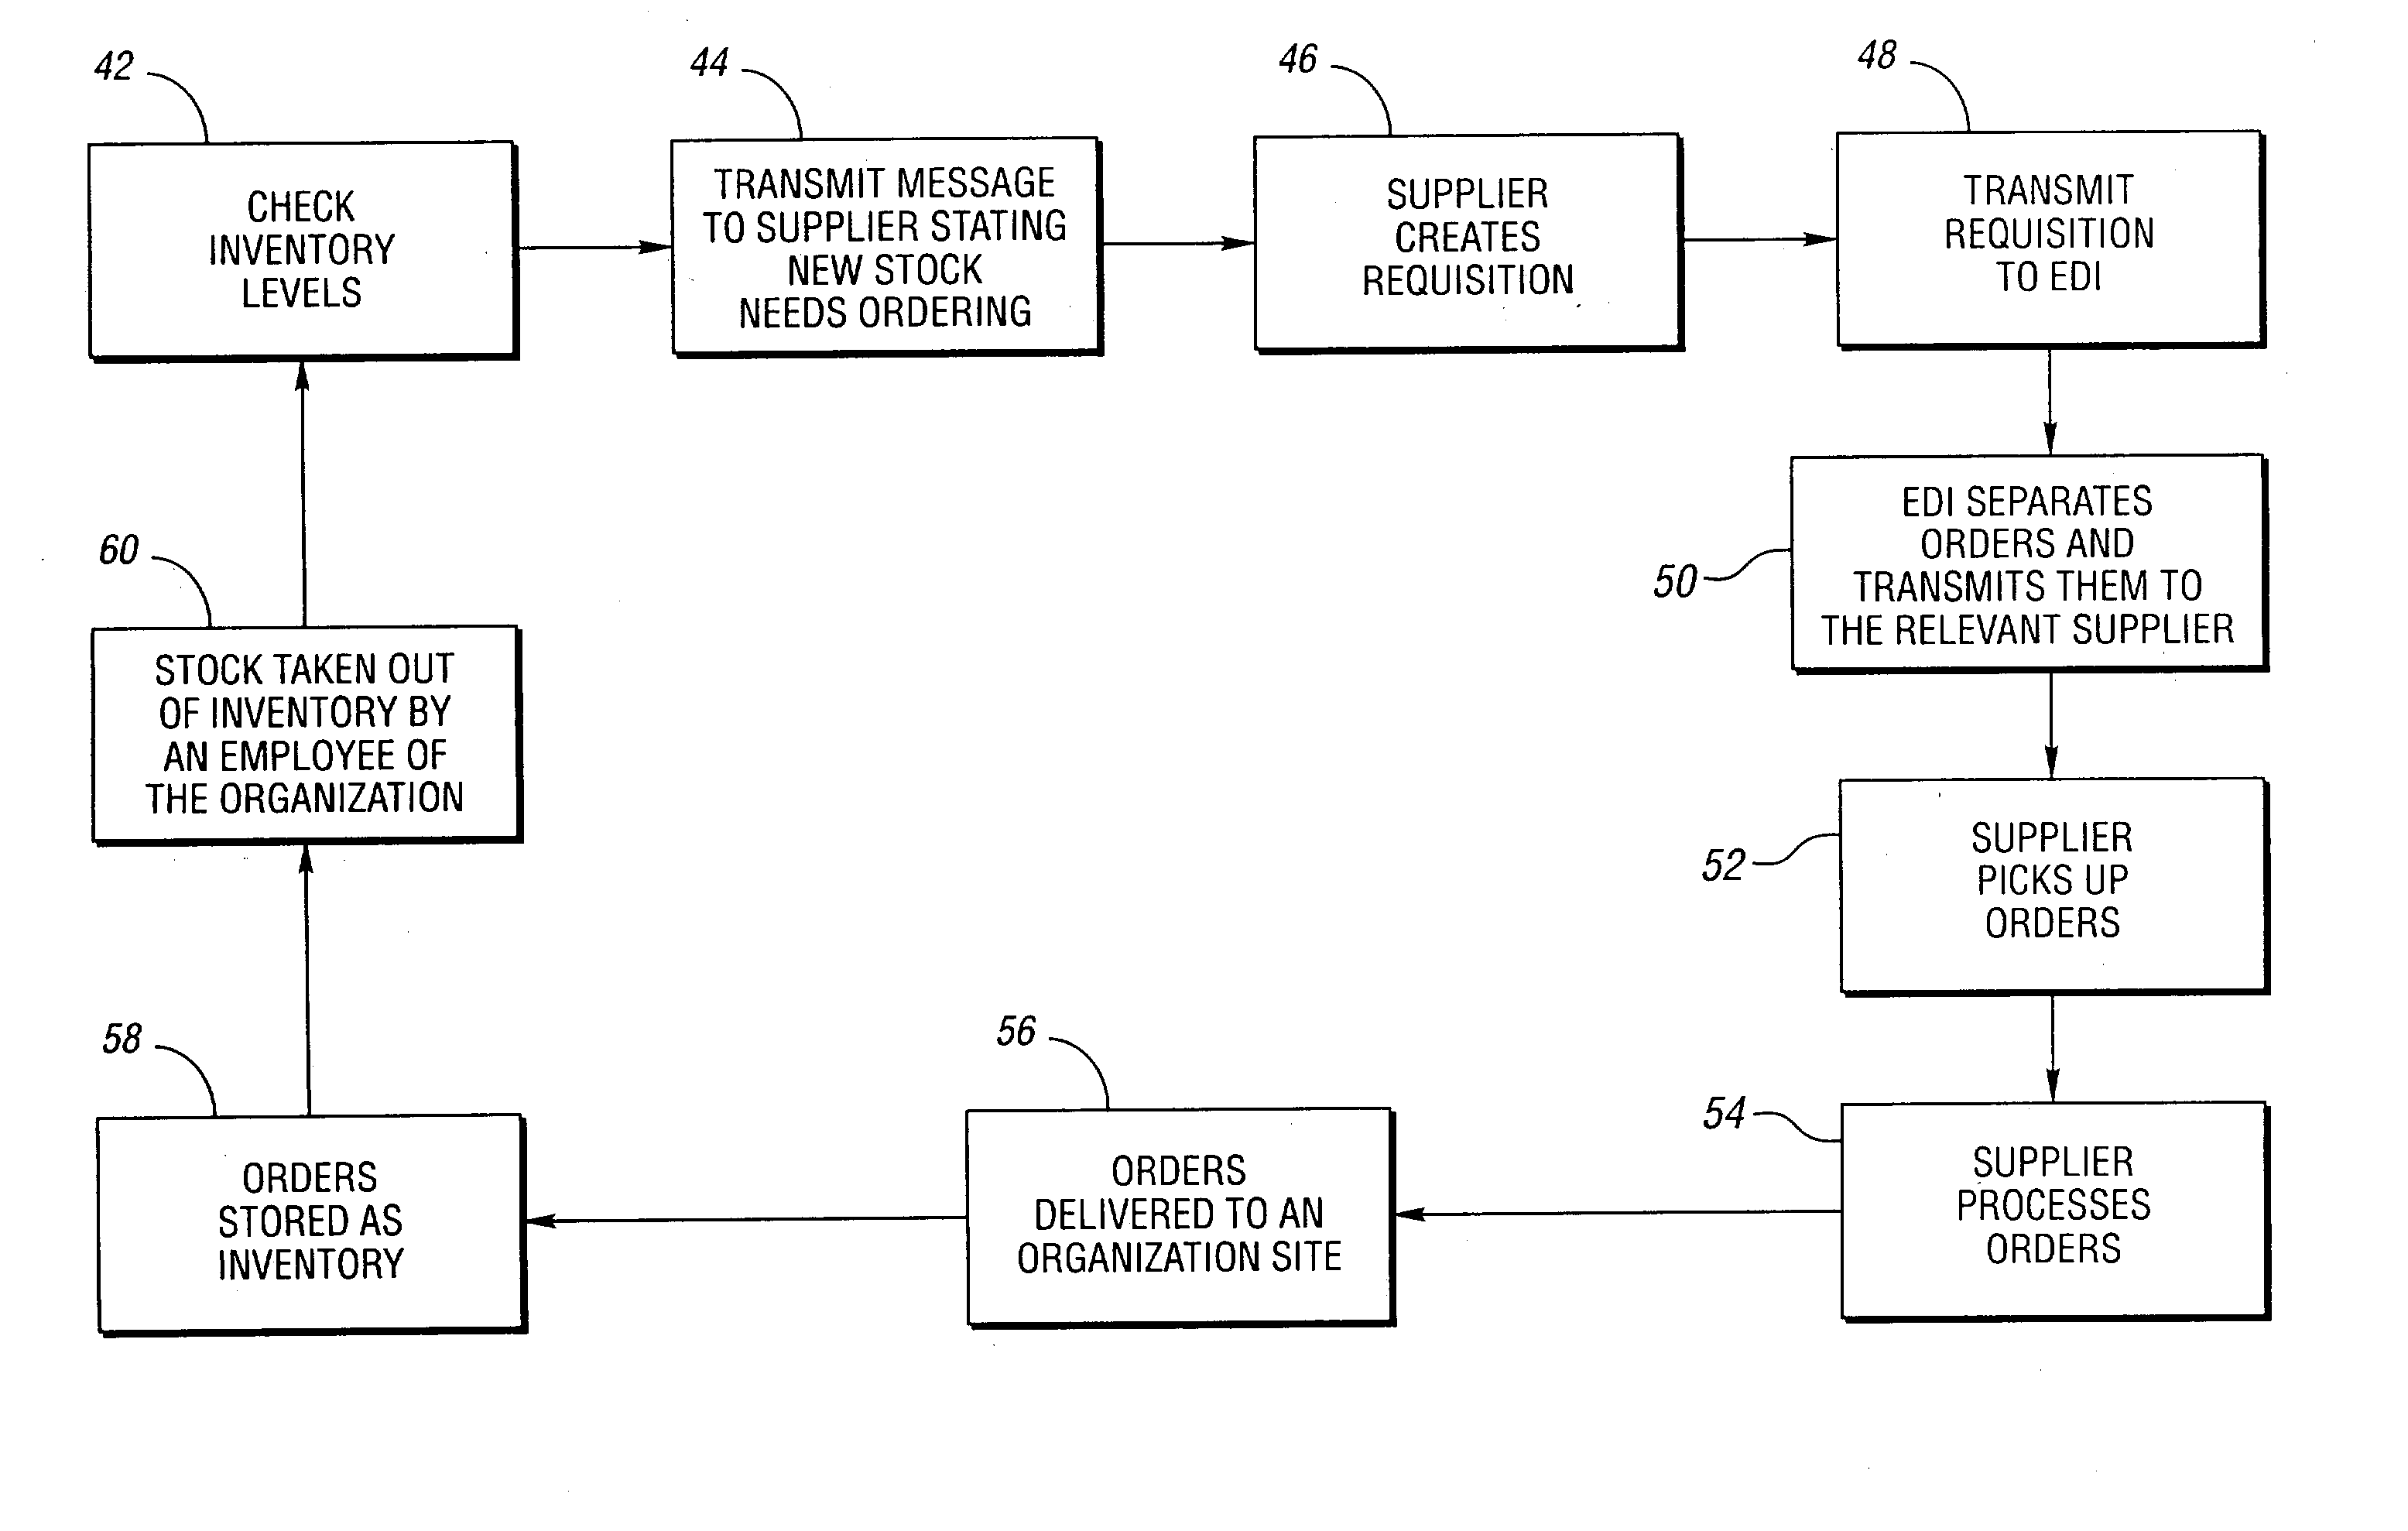 Computer-implemented method and system for managing supplier access to purchasing and inventory transactions